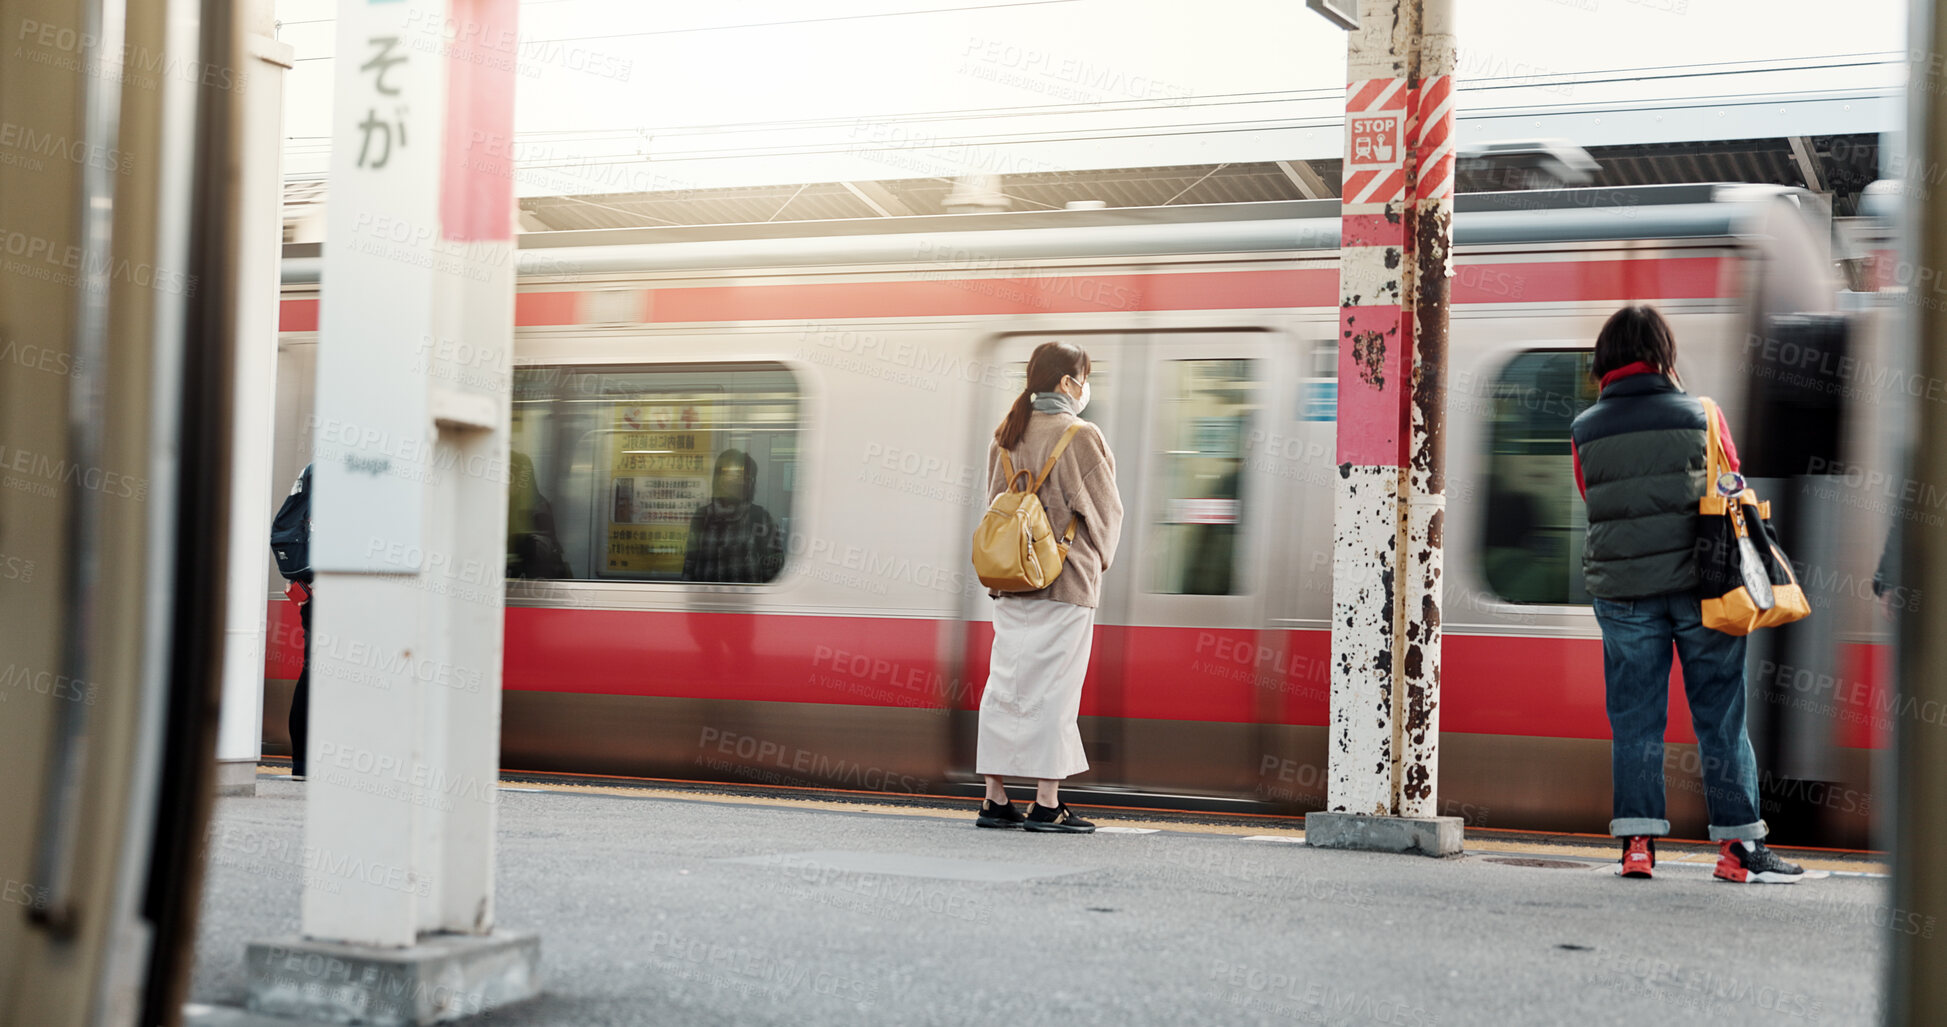 Buy stock photo Motion blur, train with people and travel, journey with commute or tourism, public transportation and sightseeing. Platform, traveller at railway station in Japan and adventure with trip on metro